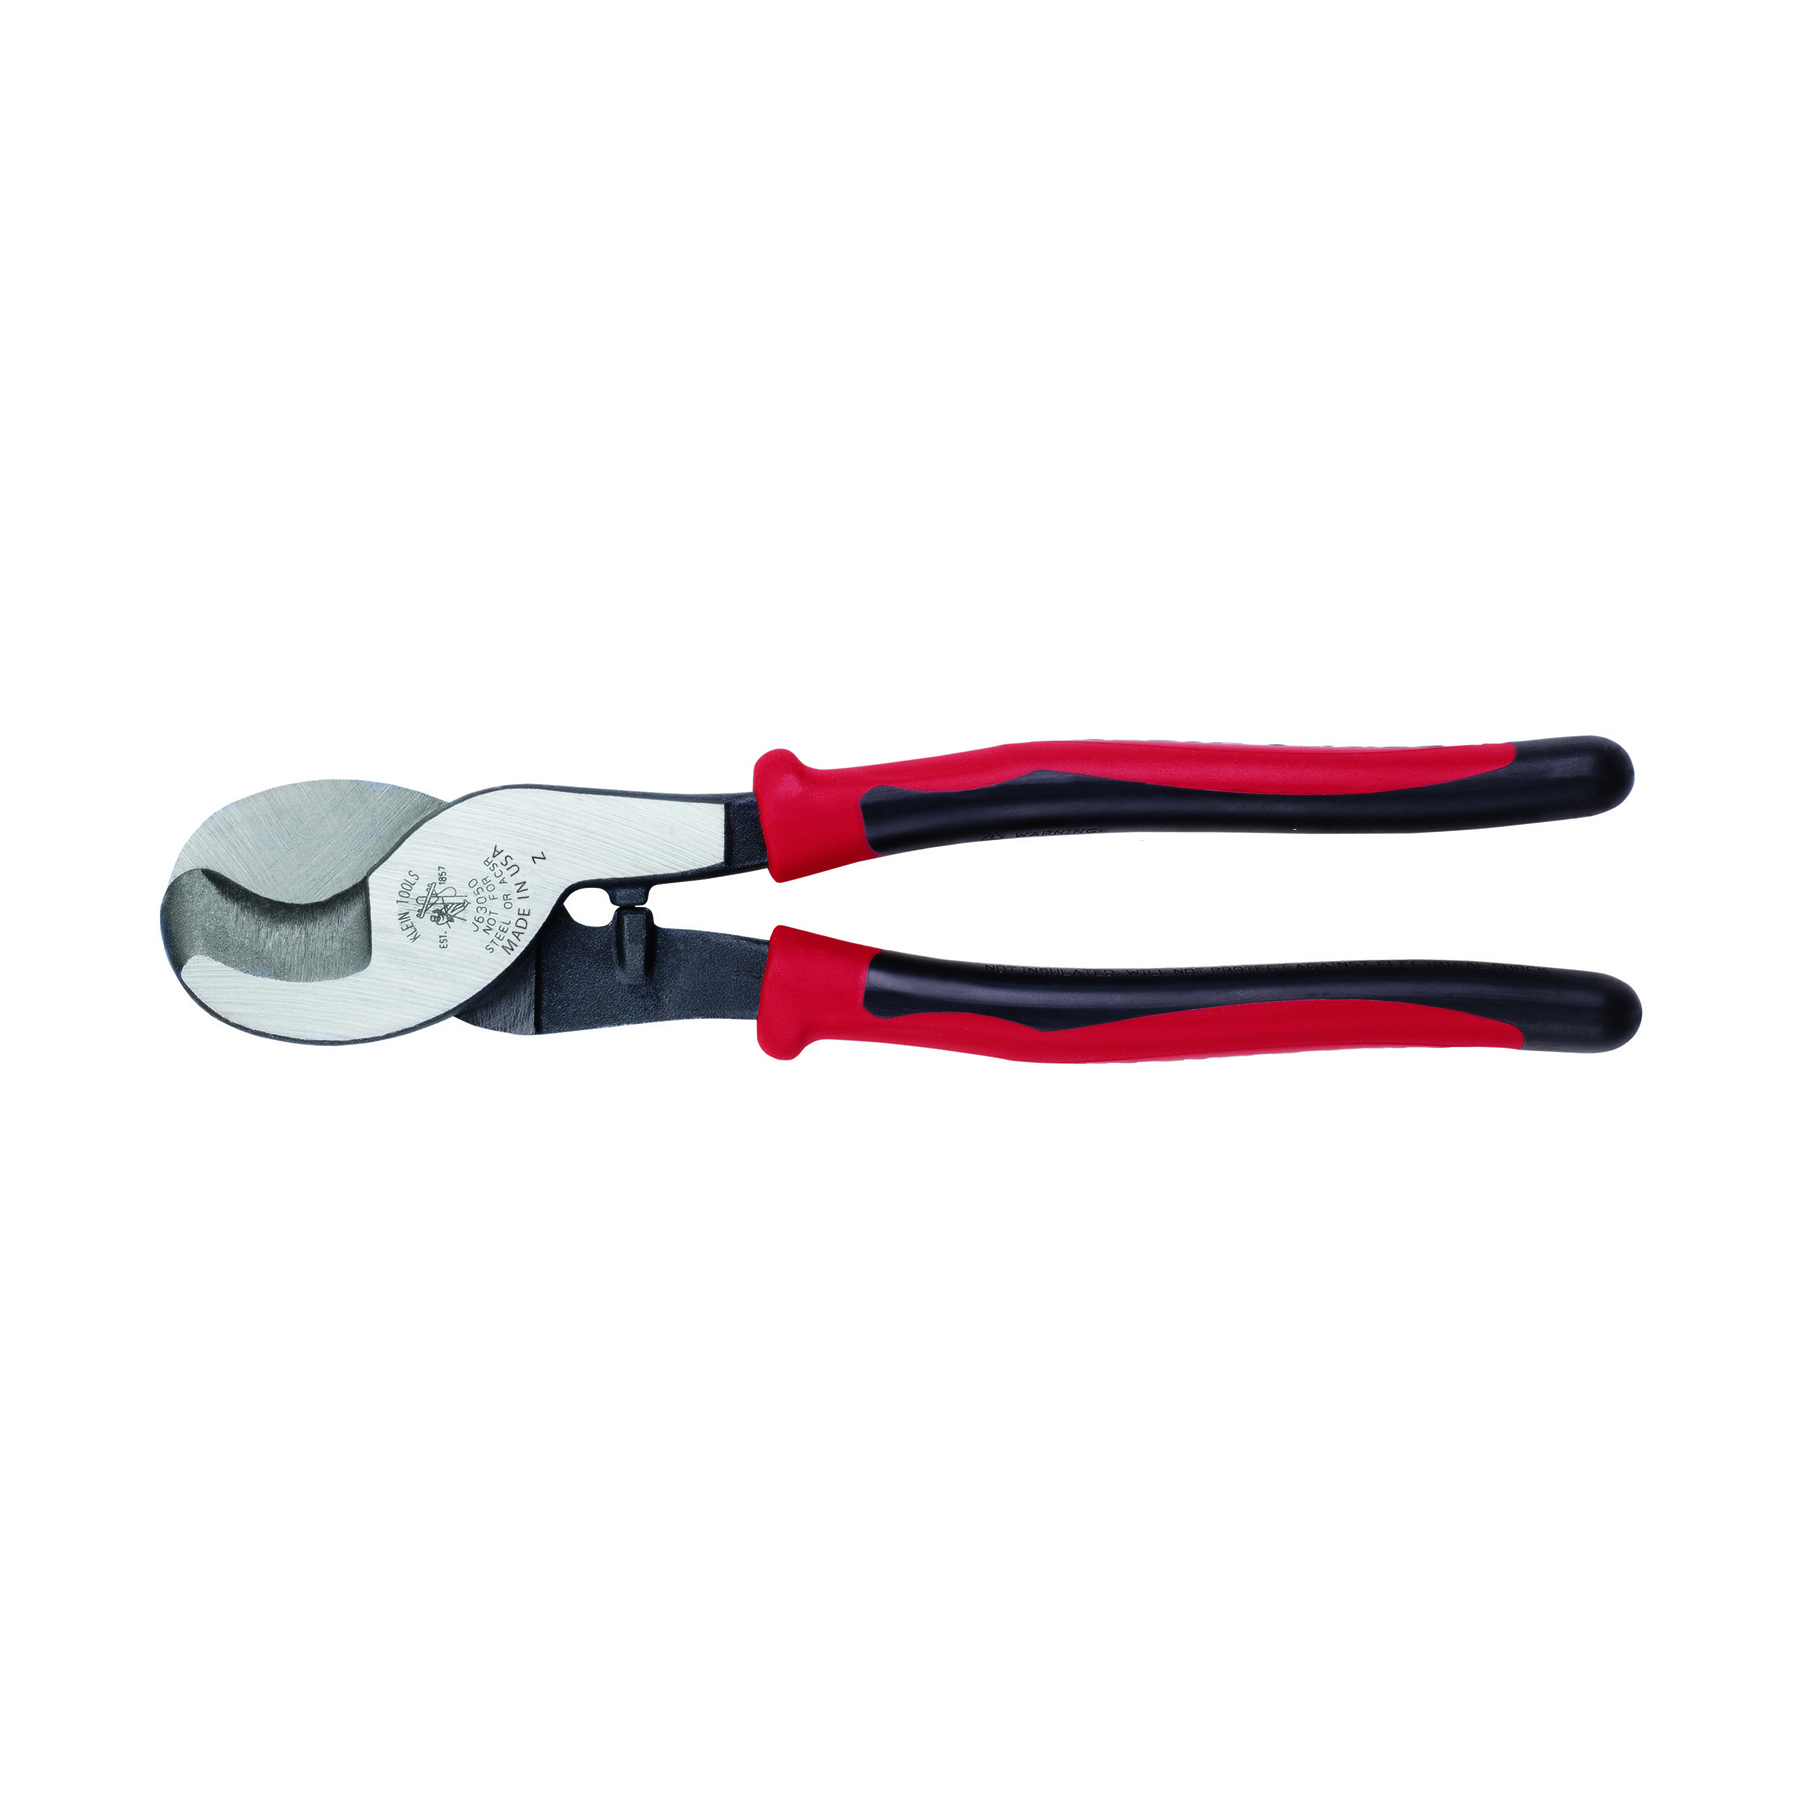 JOURNEYMAN HIGH-LEVERAGE CABLE CUTTER